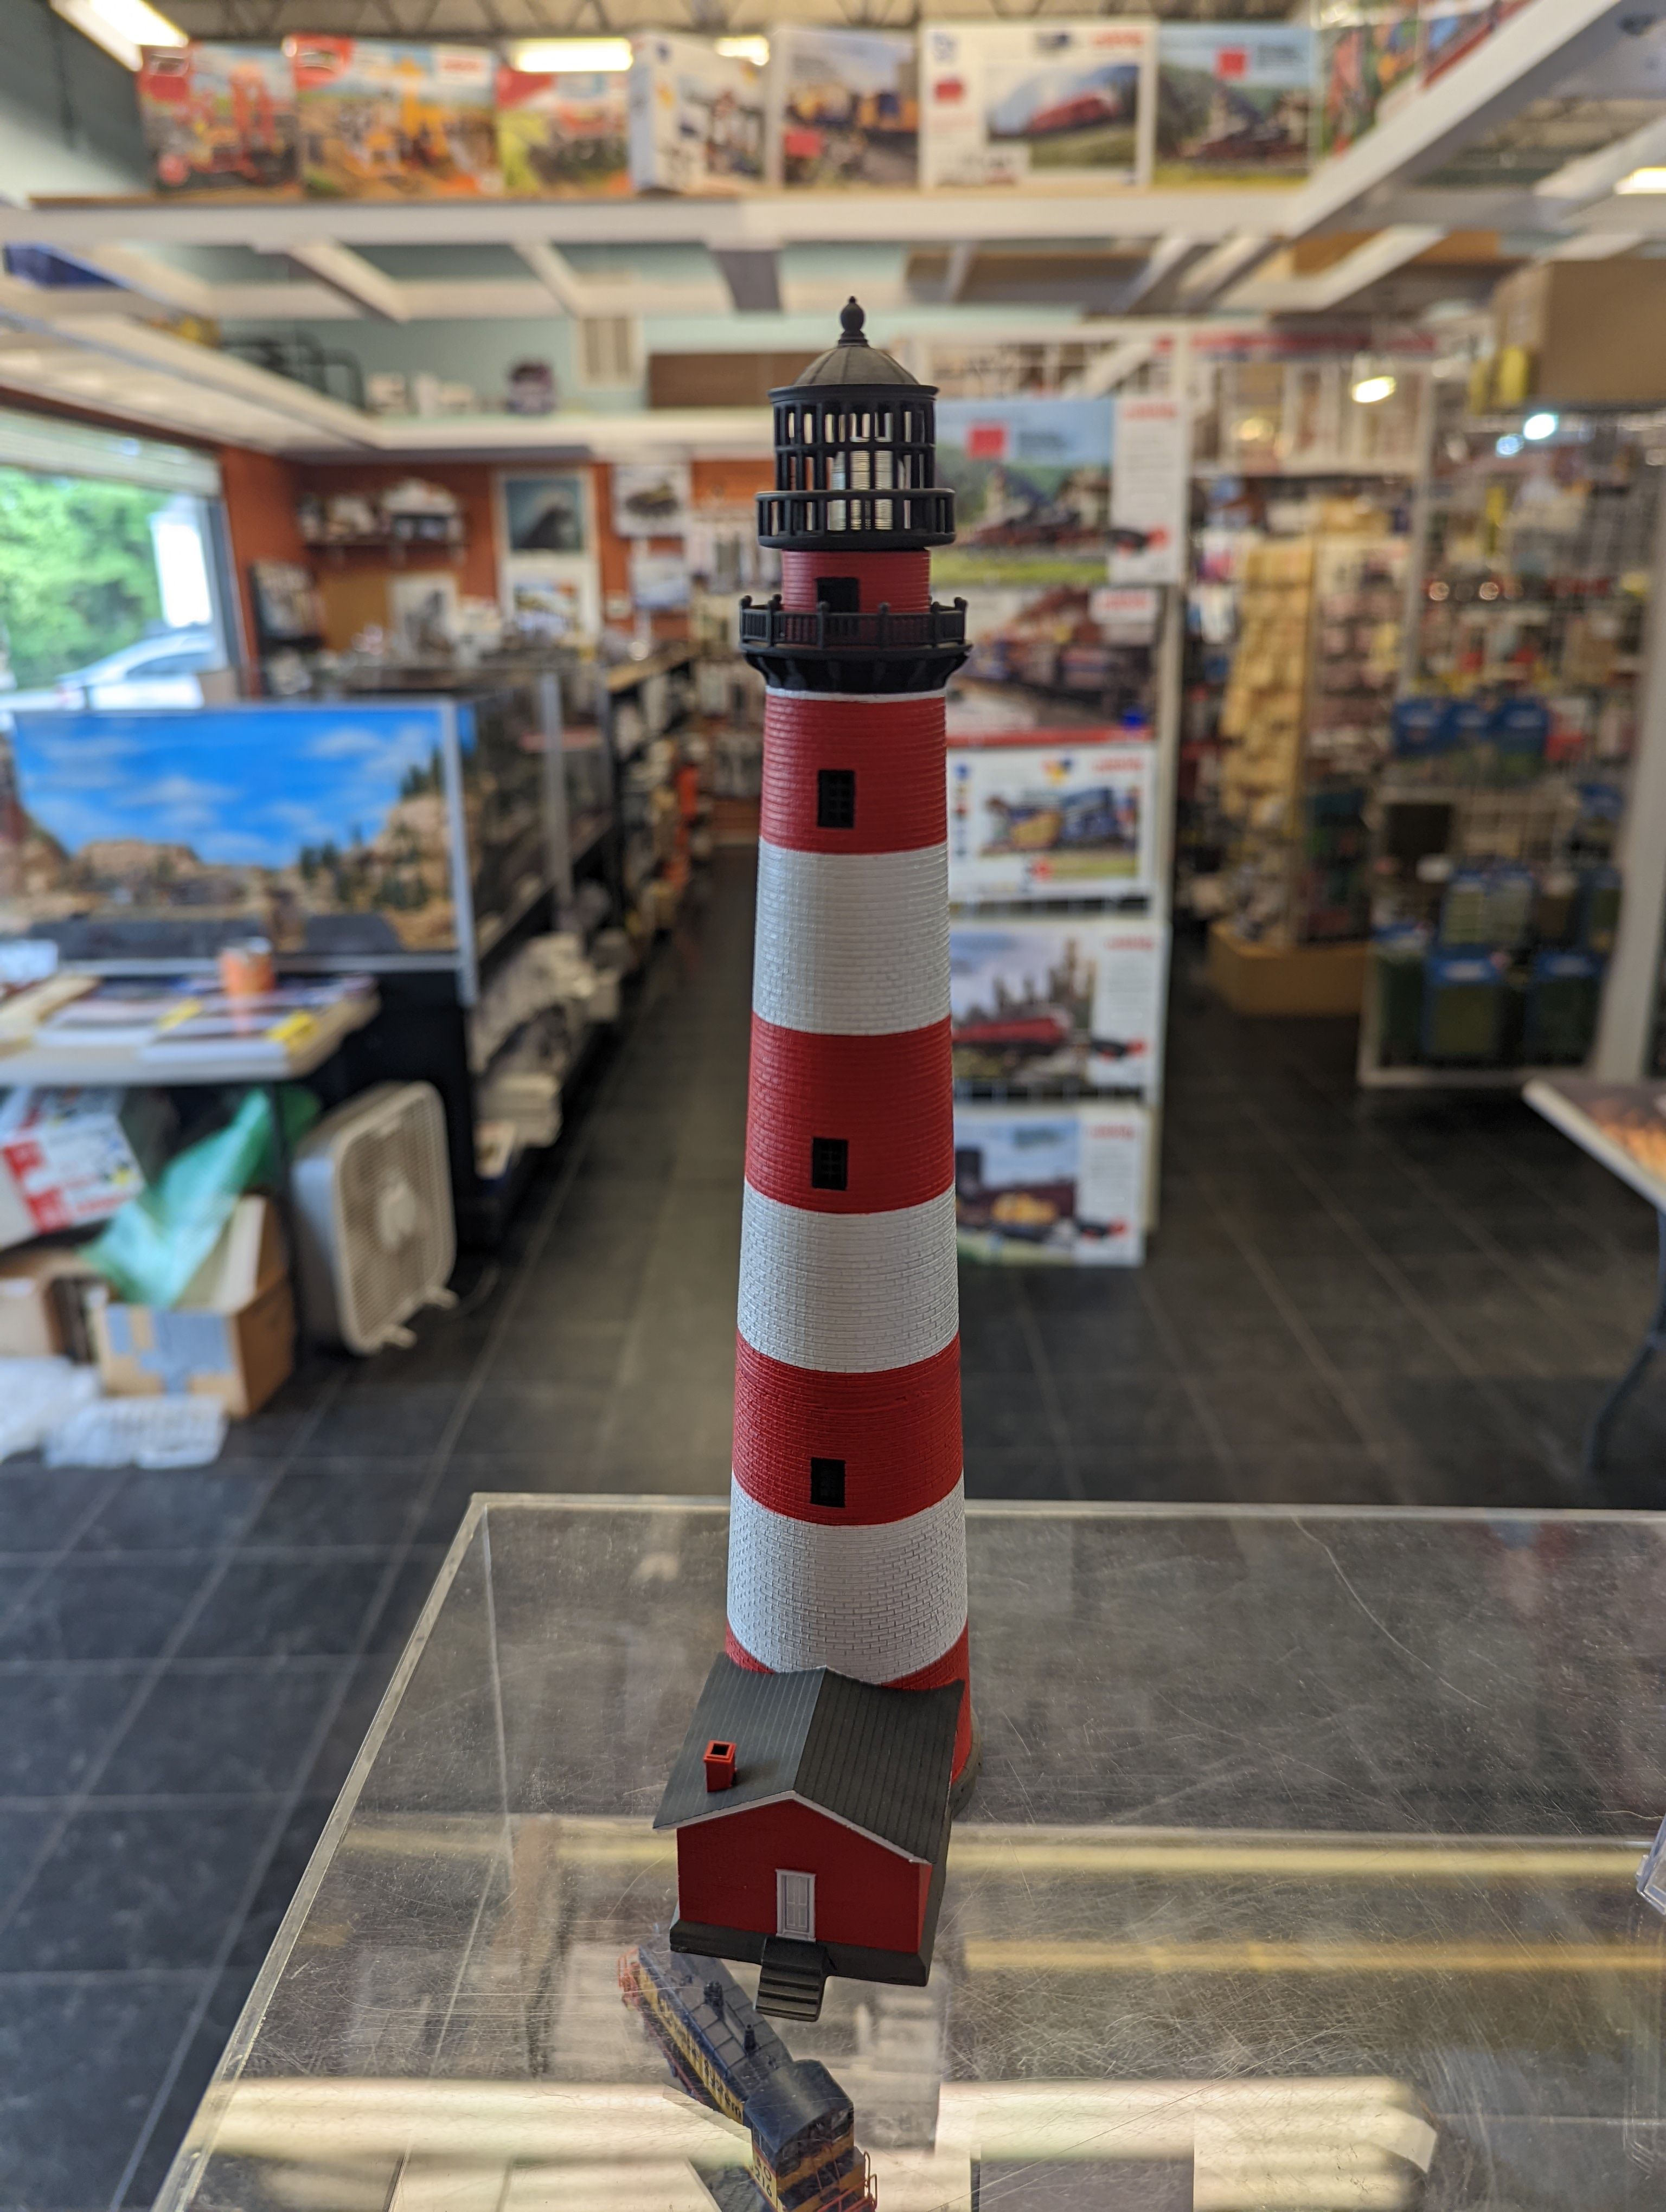 An N-Scale model of the Assateague Lighthouse.